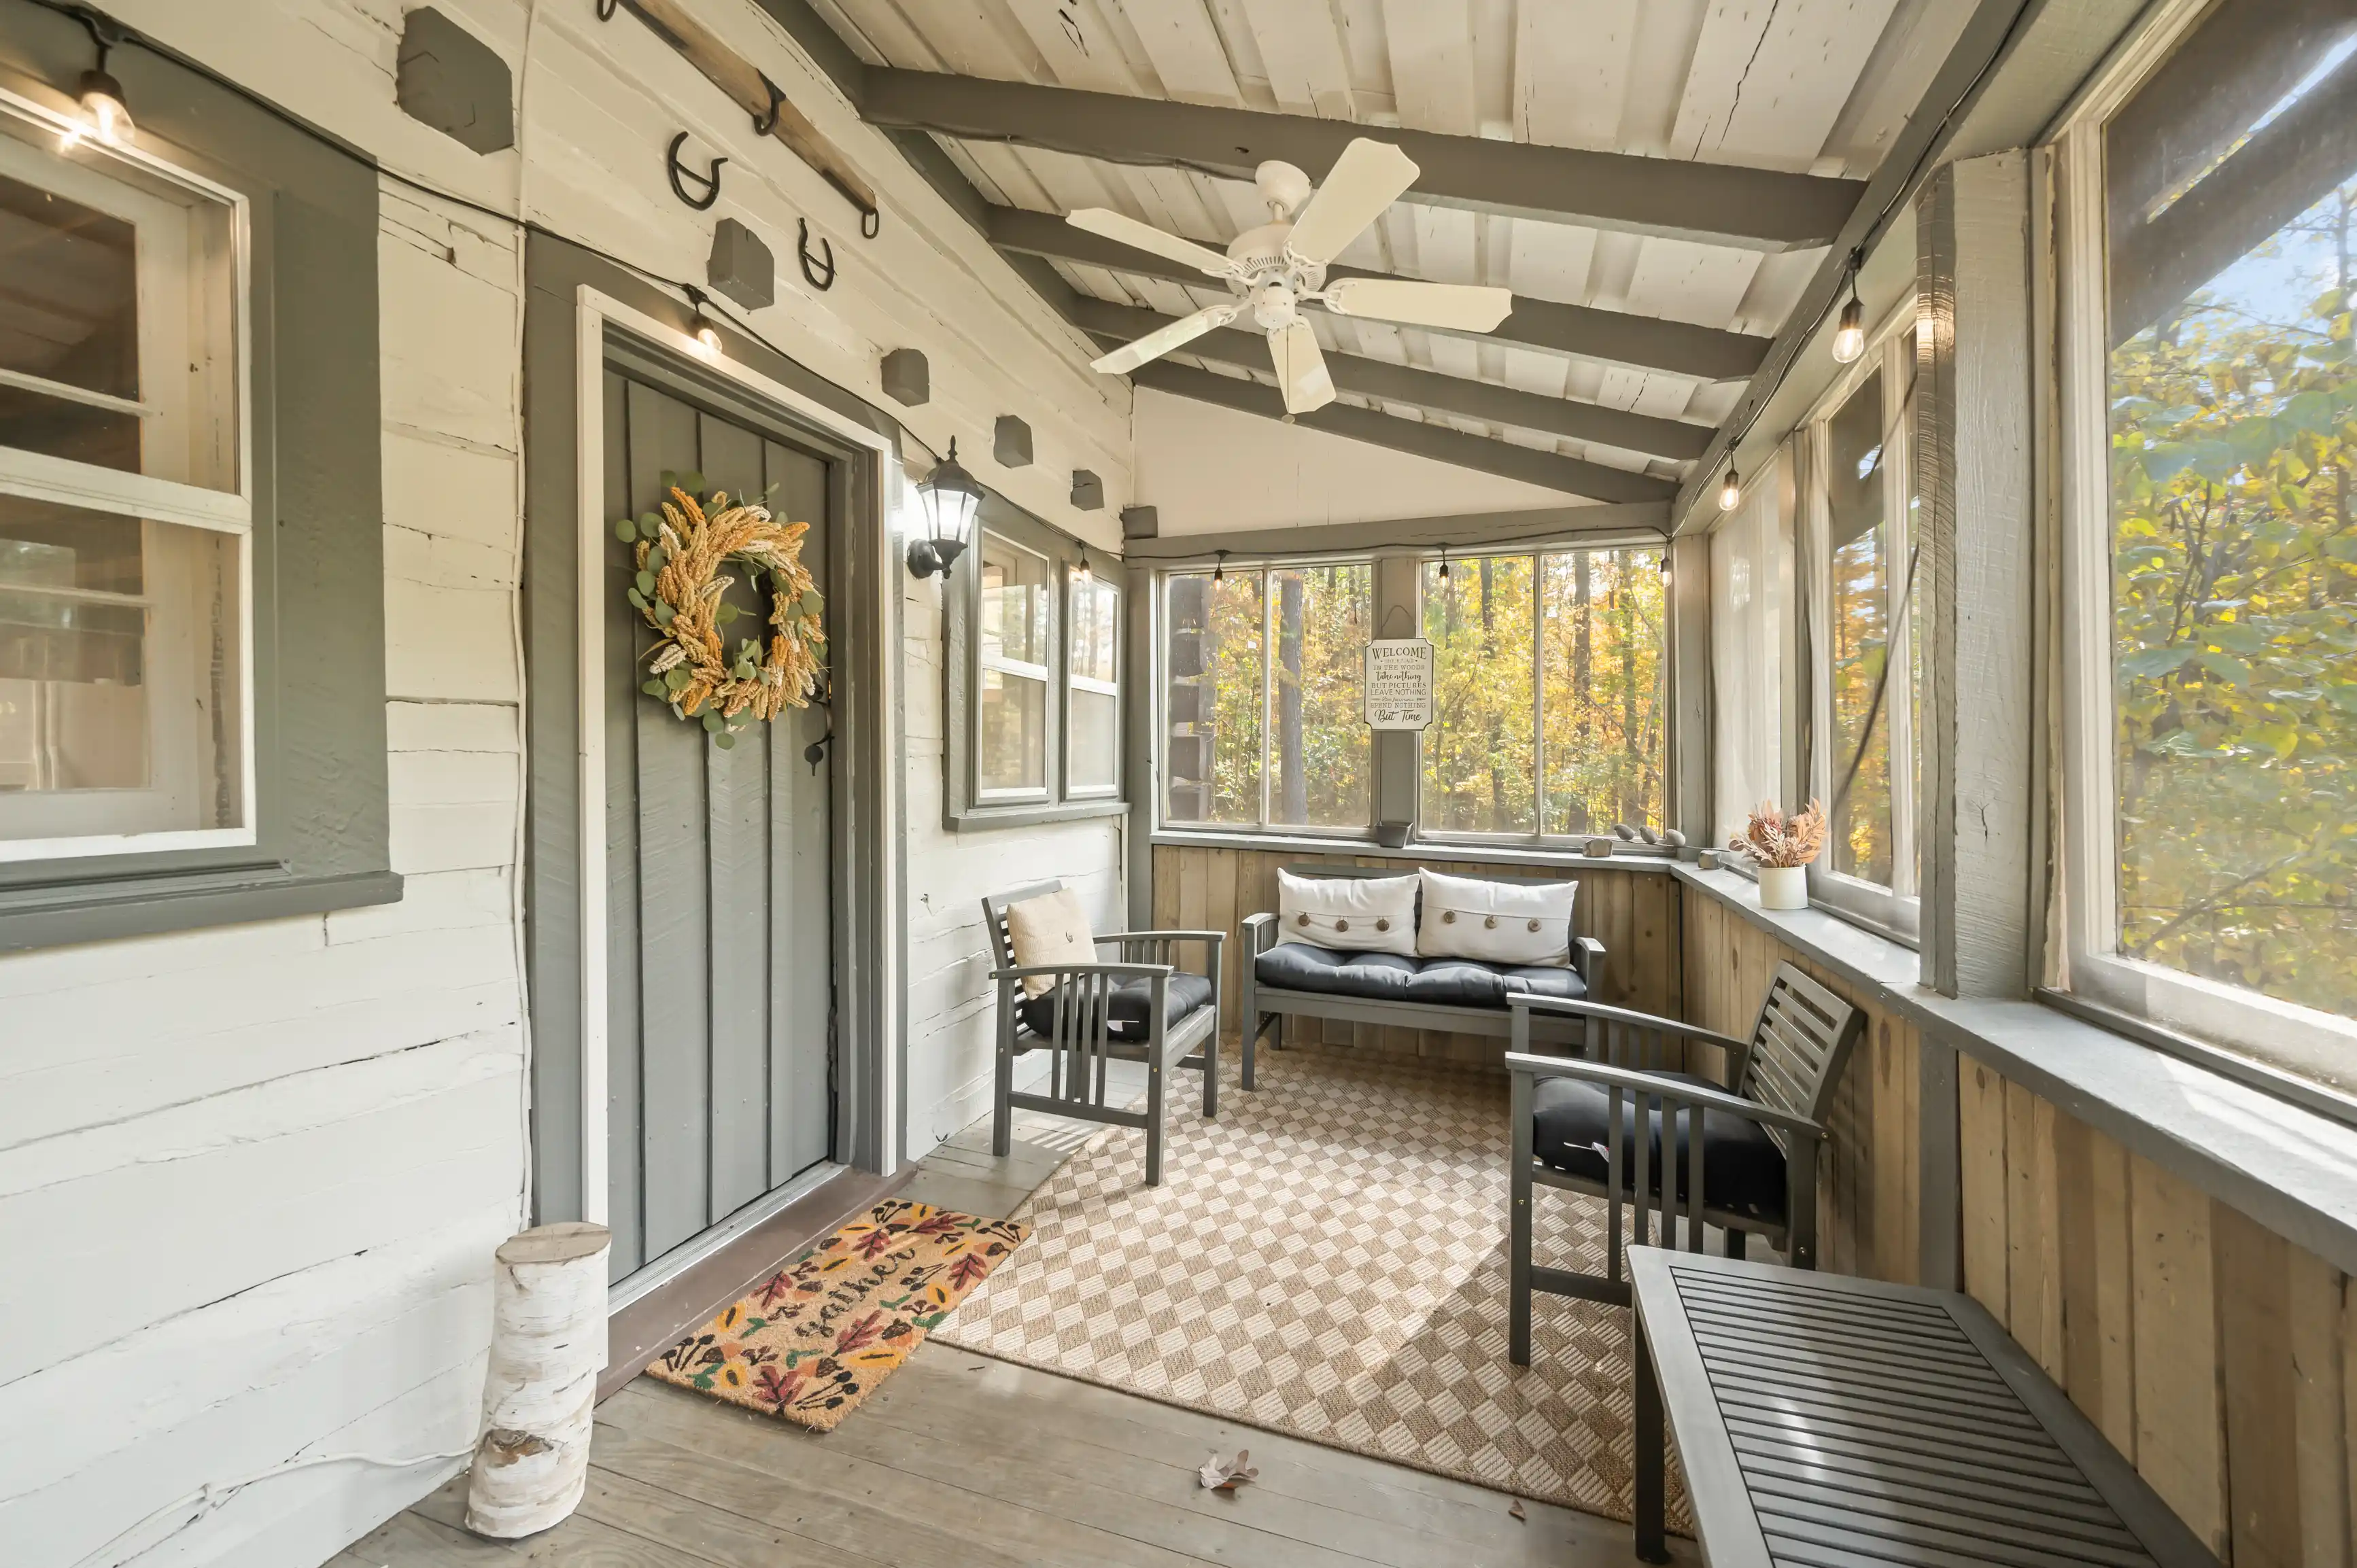 Cozy screened porch with wicker furniture, ceiling fan, and autumn wreath on the door, surrounded by trees visible through the screens.